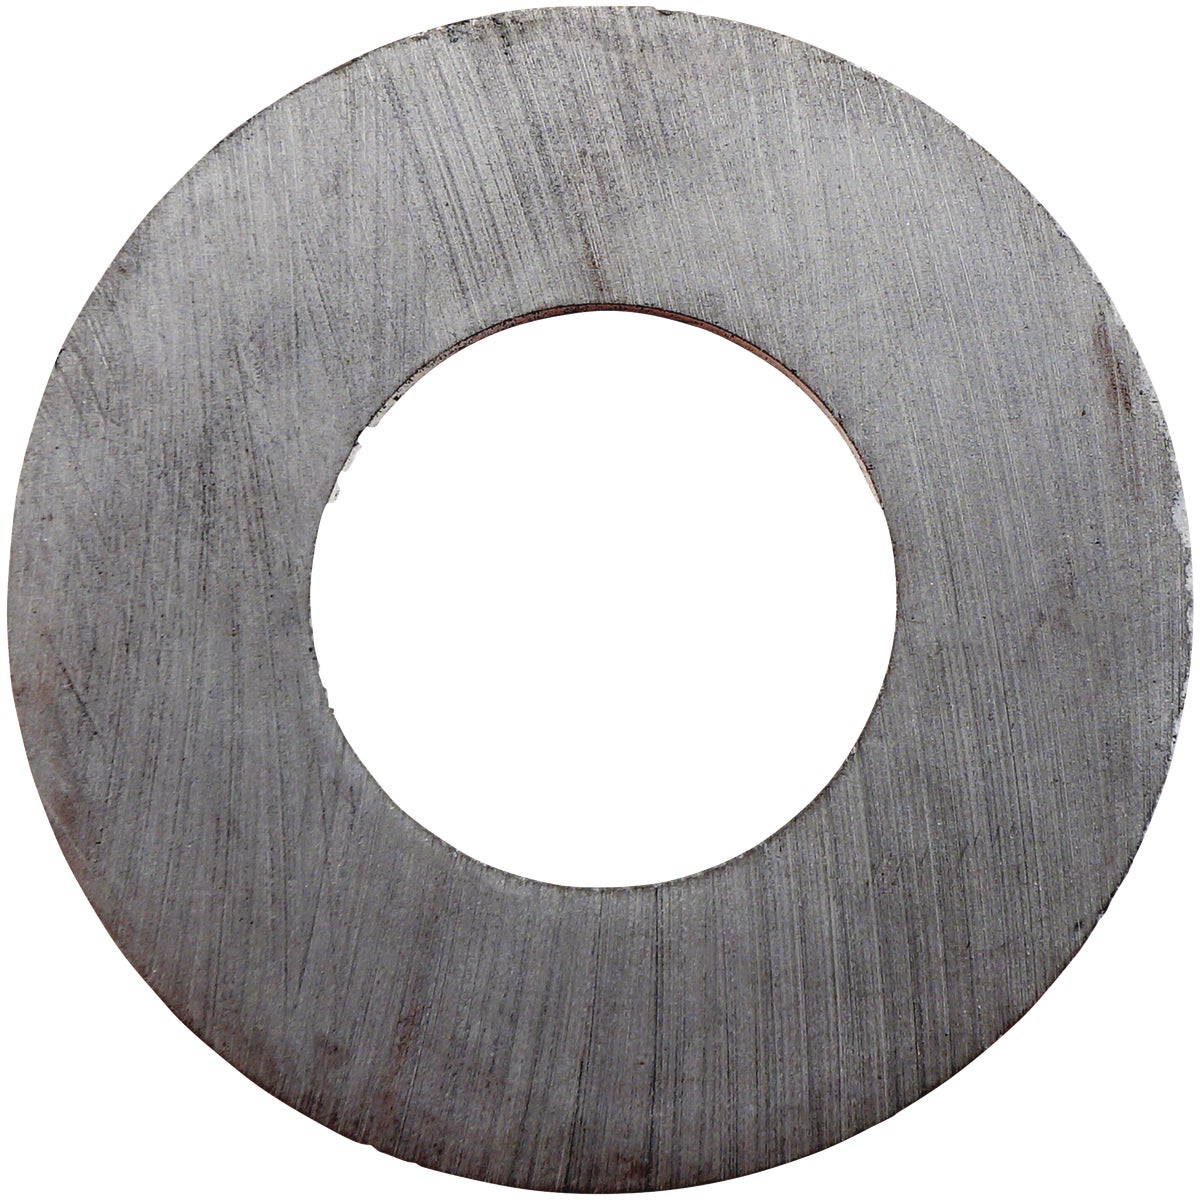 MagnetSource 1-3/4 In. Ceramic Magnet Ring (2-Pack)